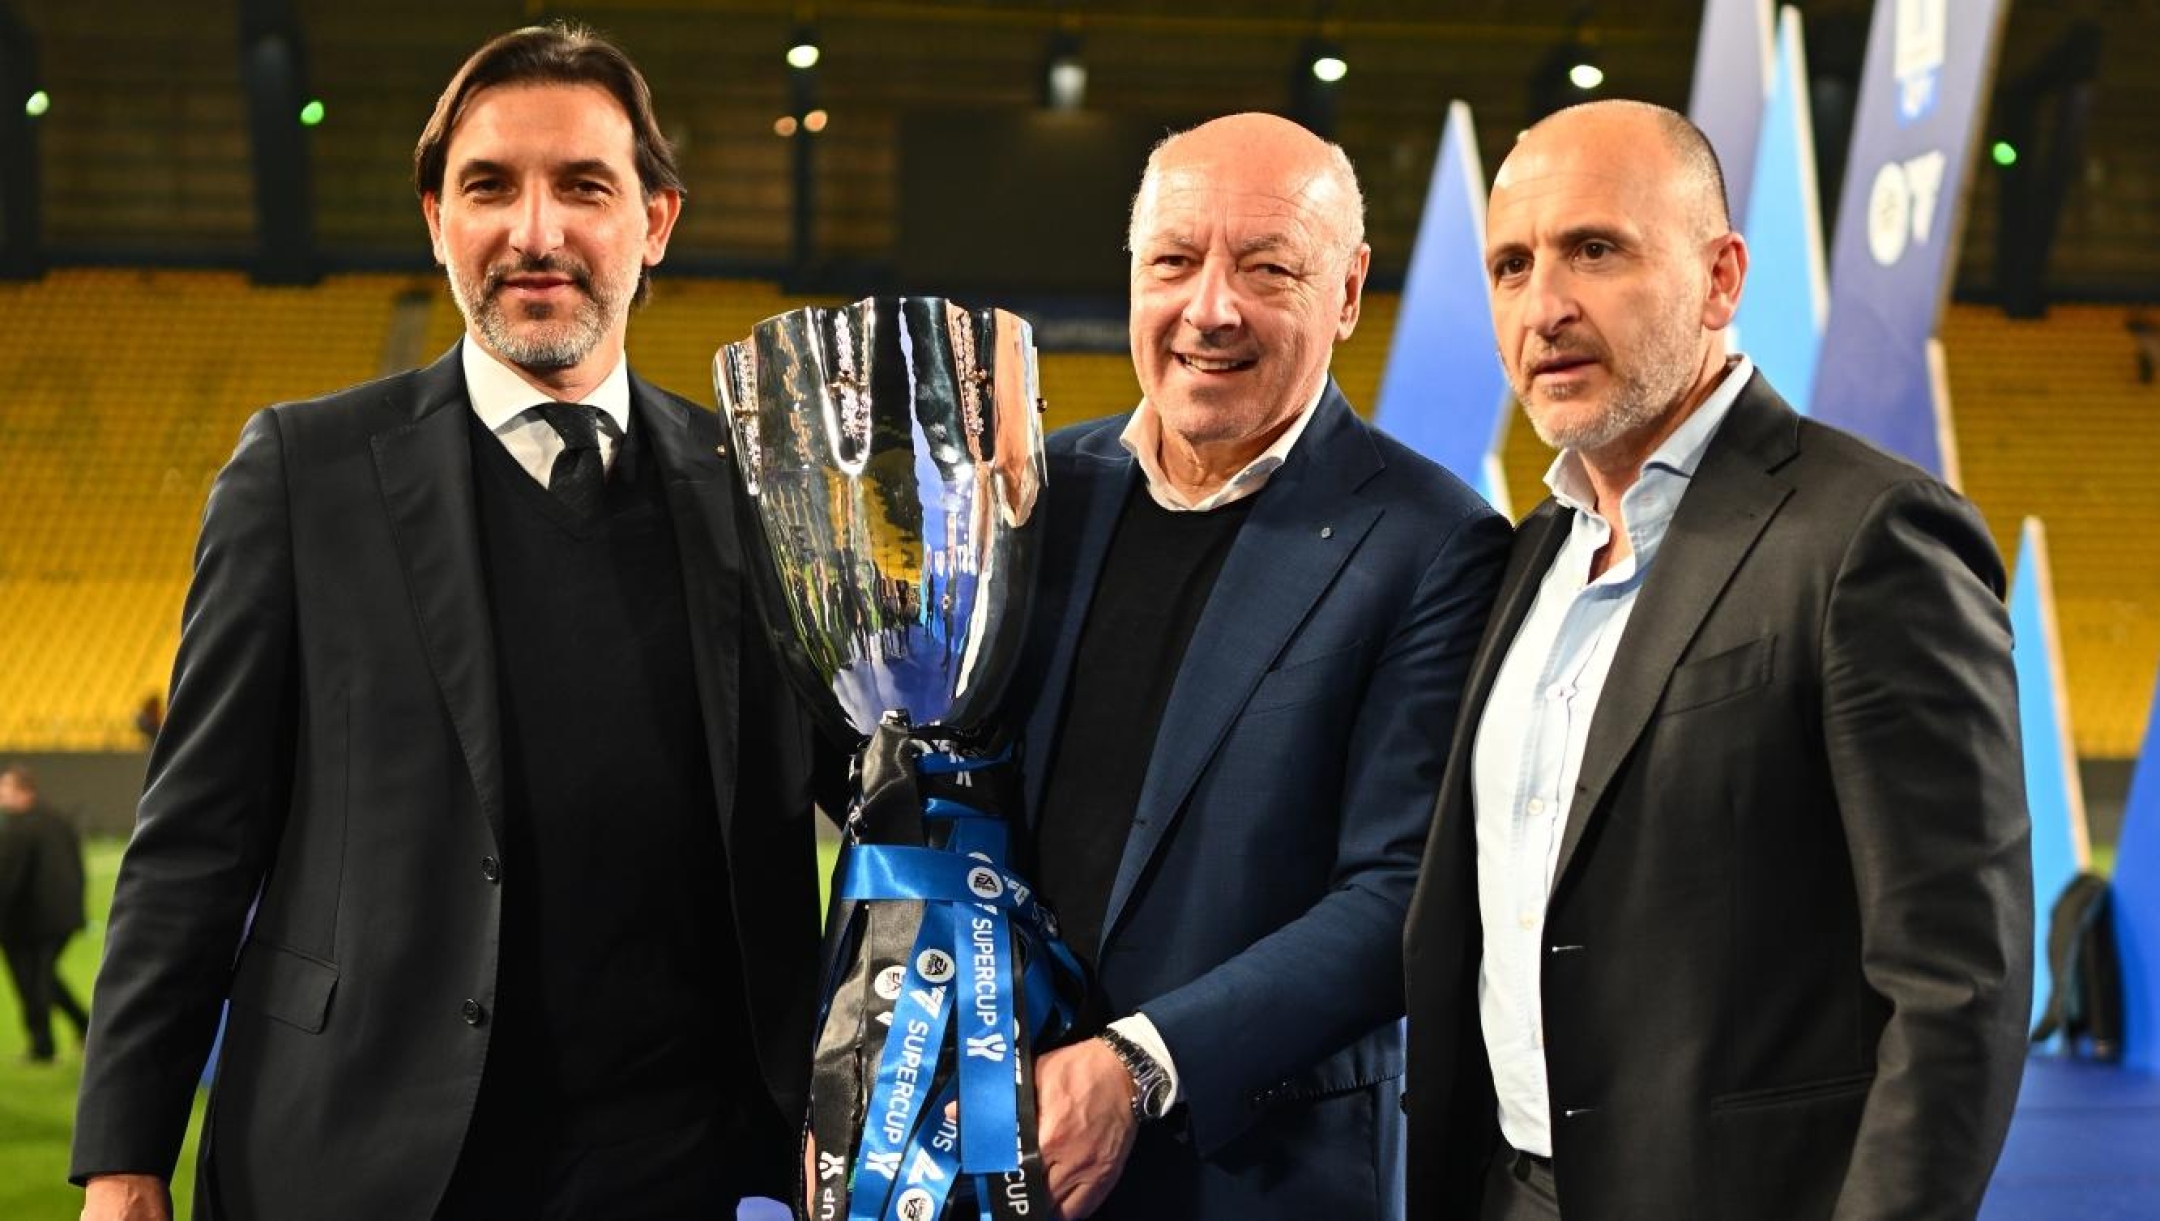 RIYADH, SAUDI ARABIA - JANUARY 22: Dario Baccin, Giuseppe Marotta and Piero Ausilio of FC Internazionale pose with the trophy at the end of the Italian EA Sports FC Supercup Final match between SSC Napoli and FC Internazionale at Al-Awwal Stadium on January 22, 2024 in Riyadh, Saudi Arabia. (Photo by Mattia Ozbot - Inter/Inter via Getty Images)